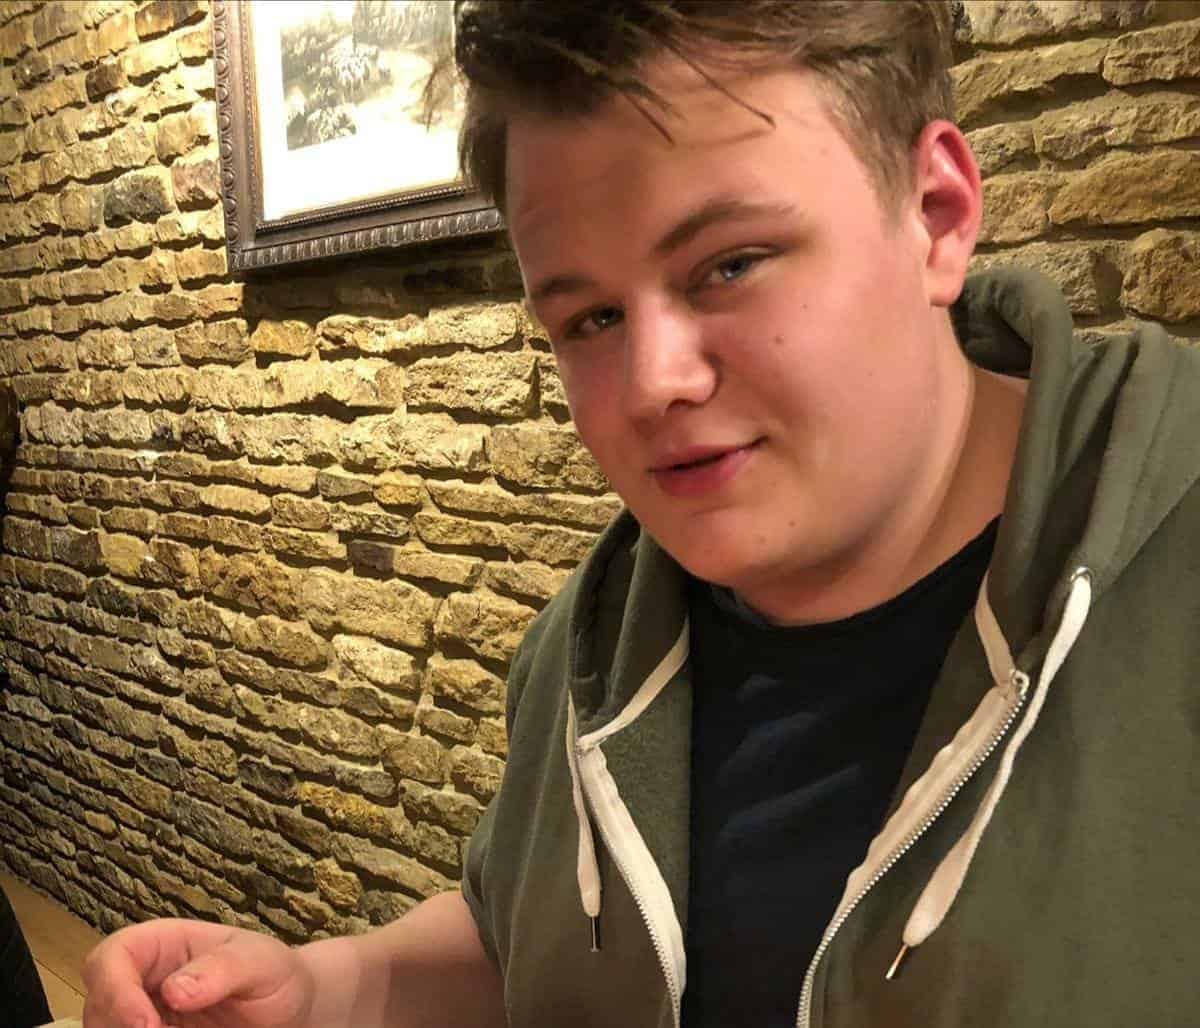 Boris Johnson has no wish or intention to meet with us, say Harry Dunn’s family